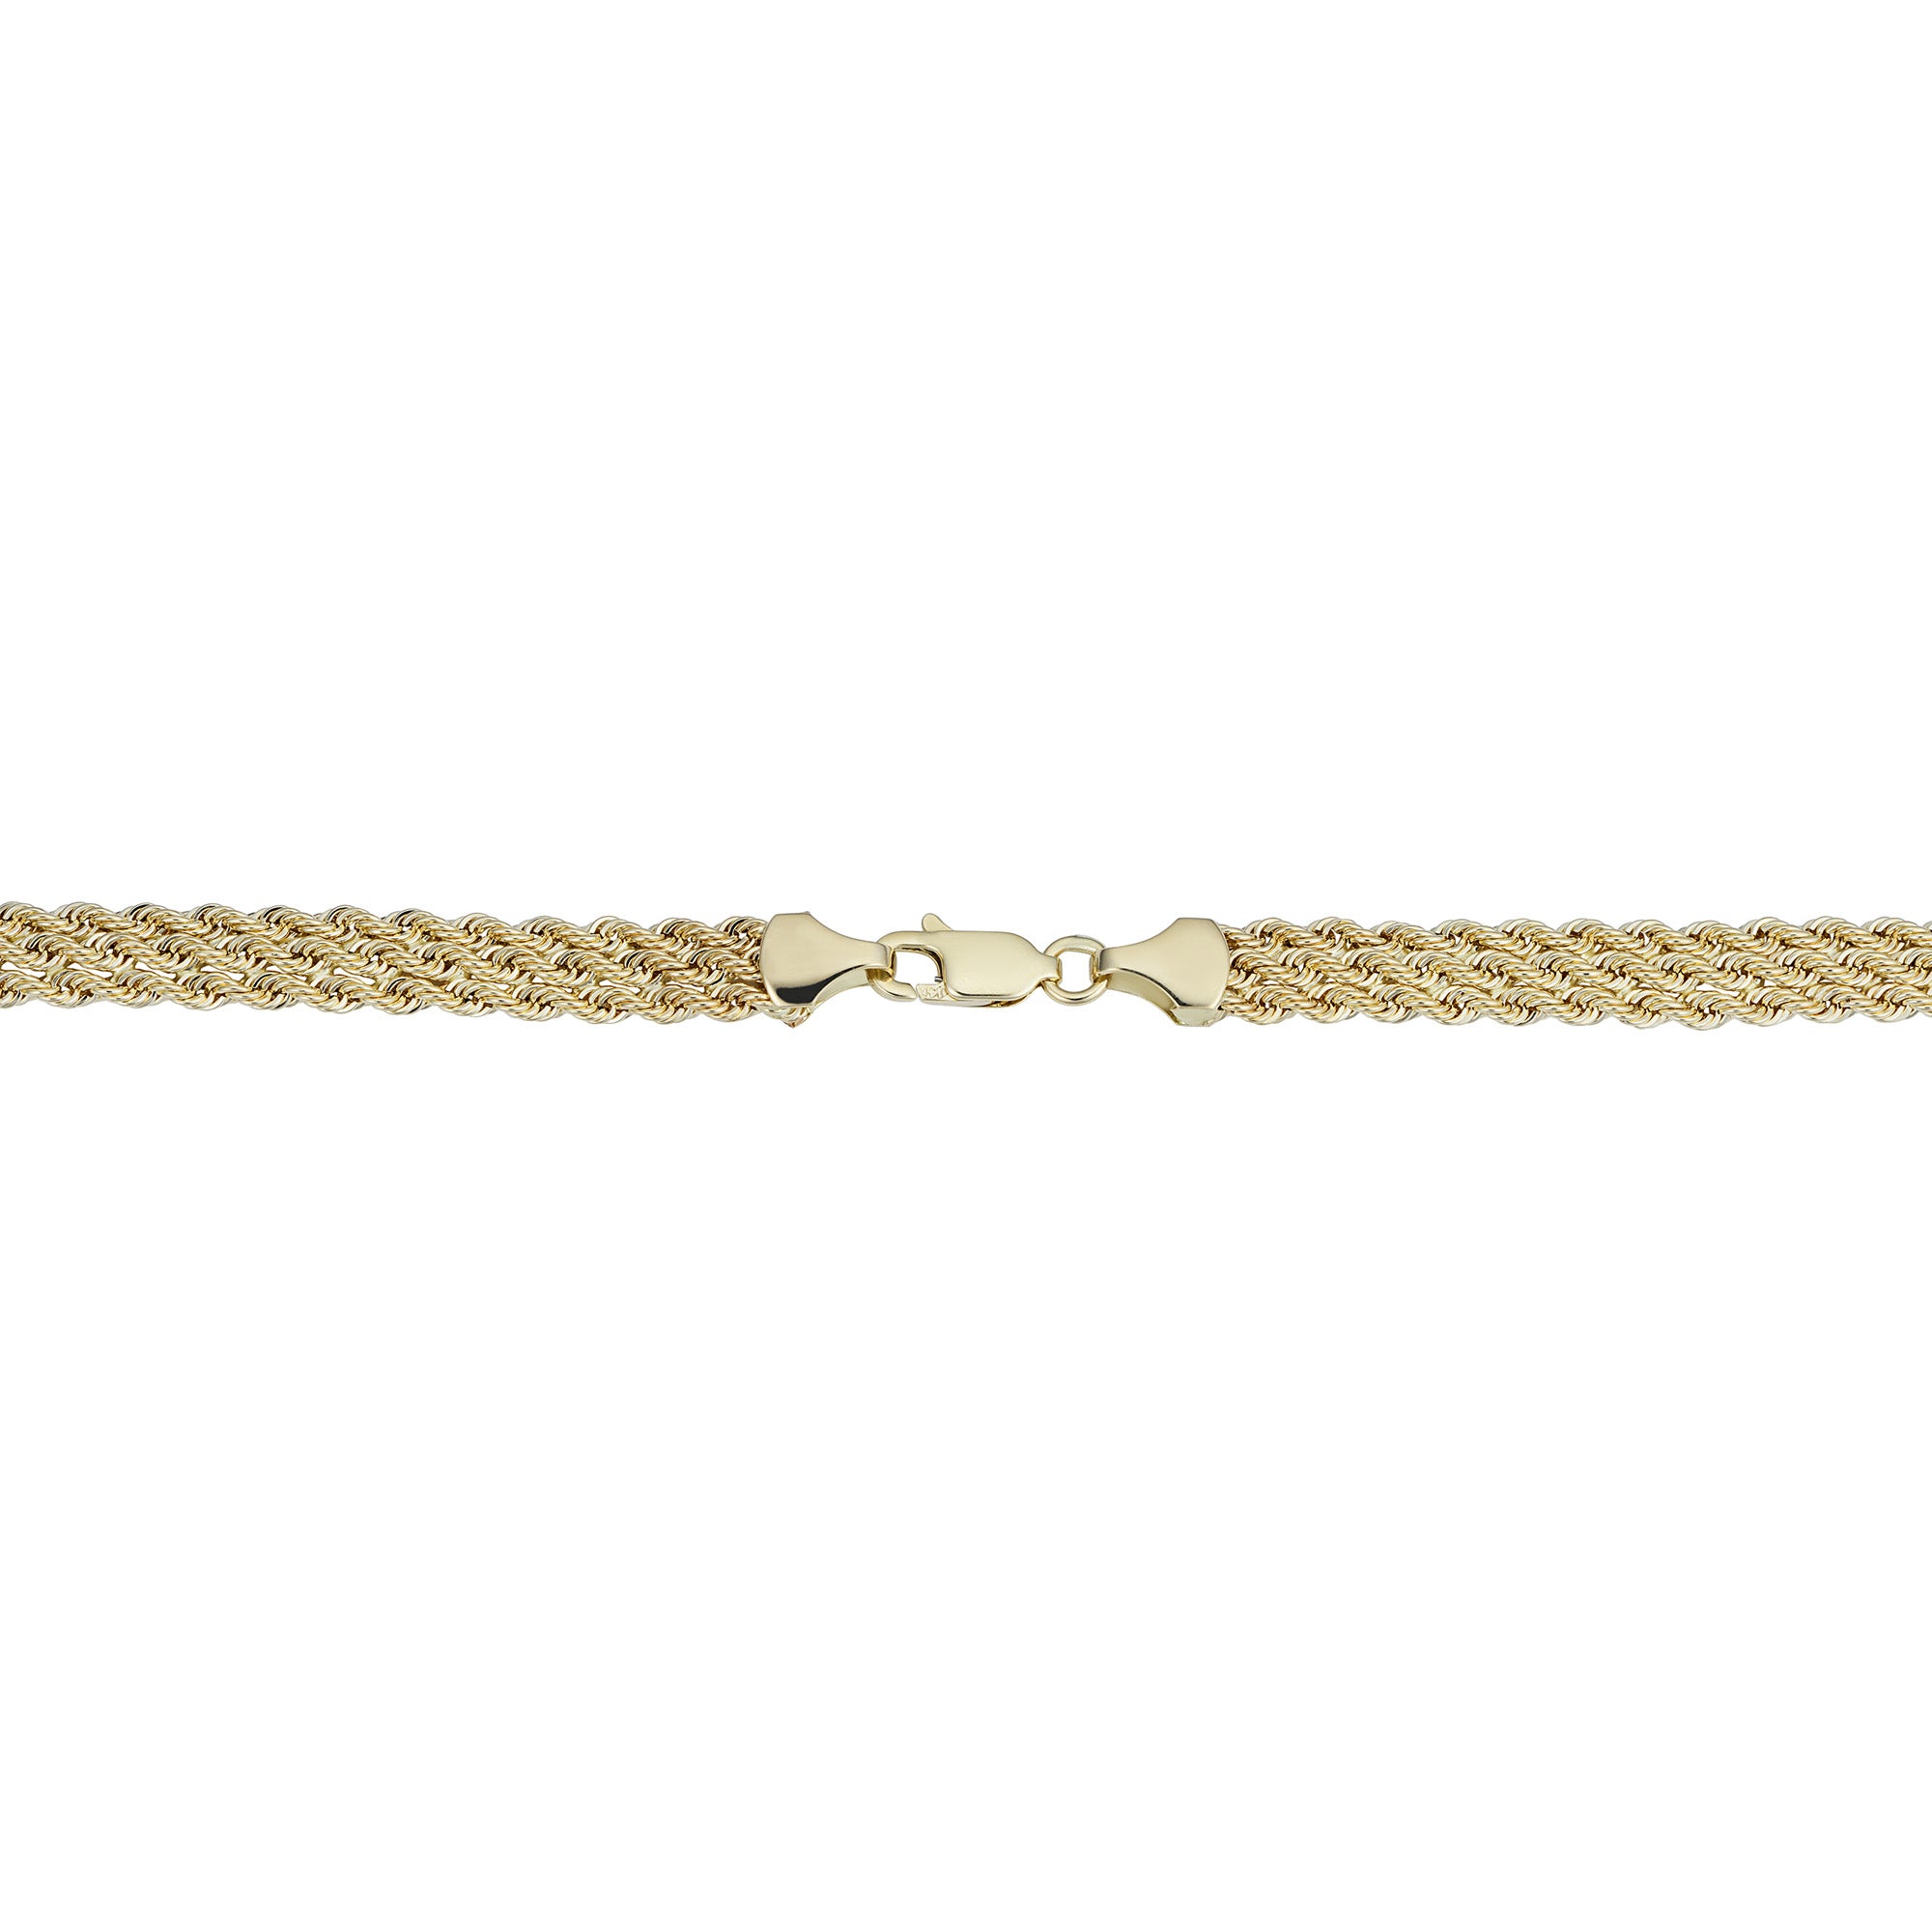 Vintage Solid 14k Yellow Gold Long Rope Chain Bracelet 8.5 Inches Unisex  Mens Real Genuine Gold Quality Fine Estate Jewelry - Etsy